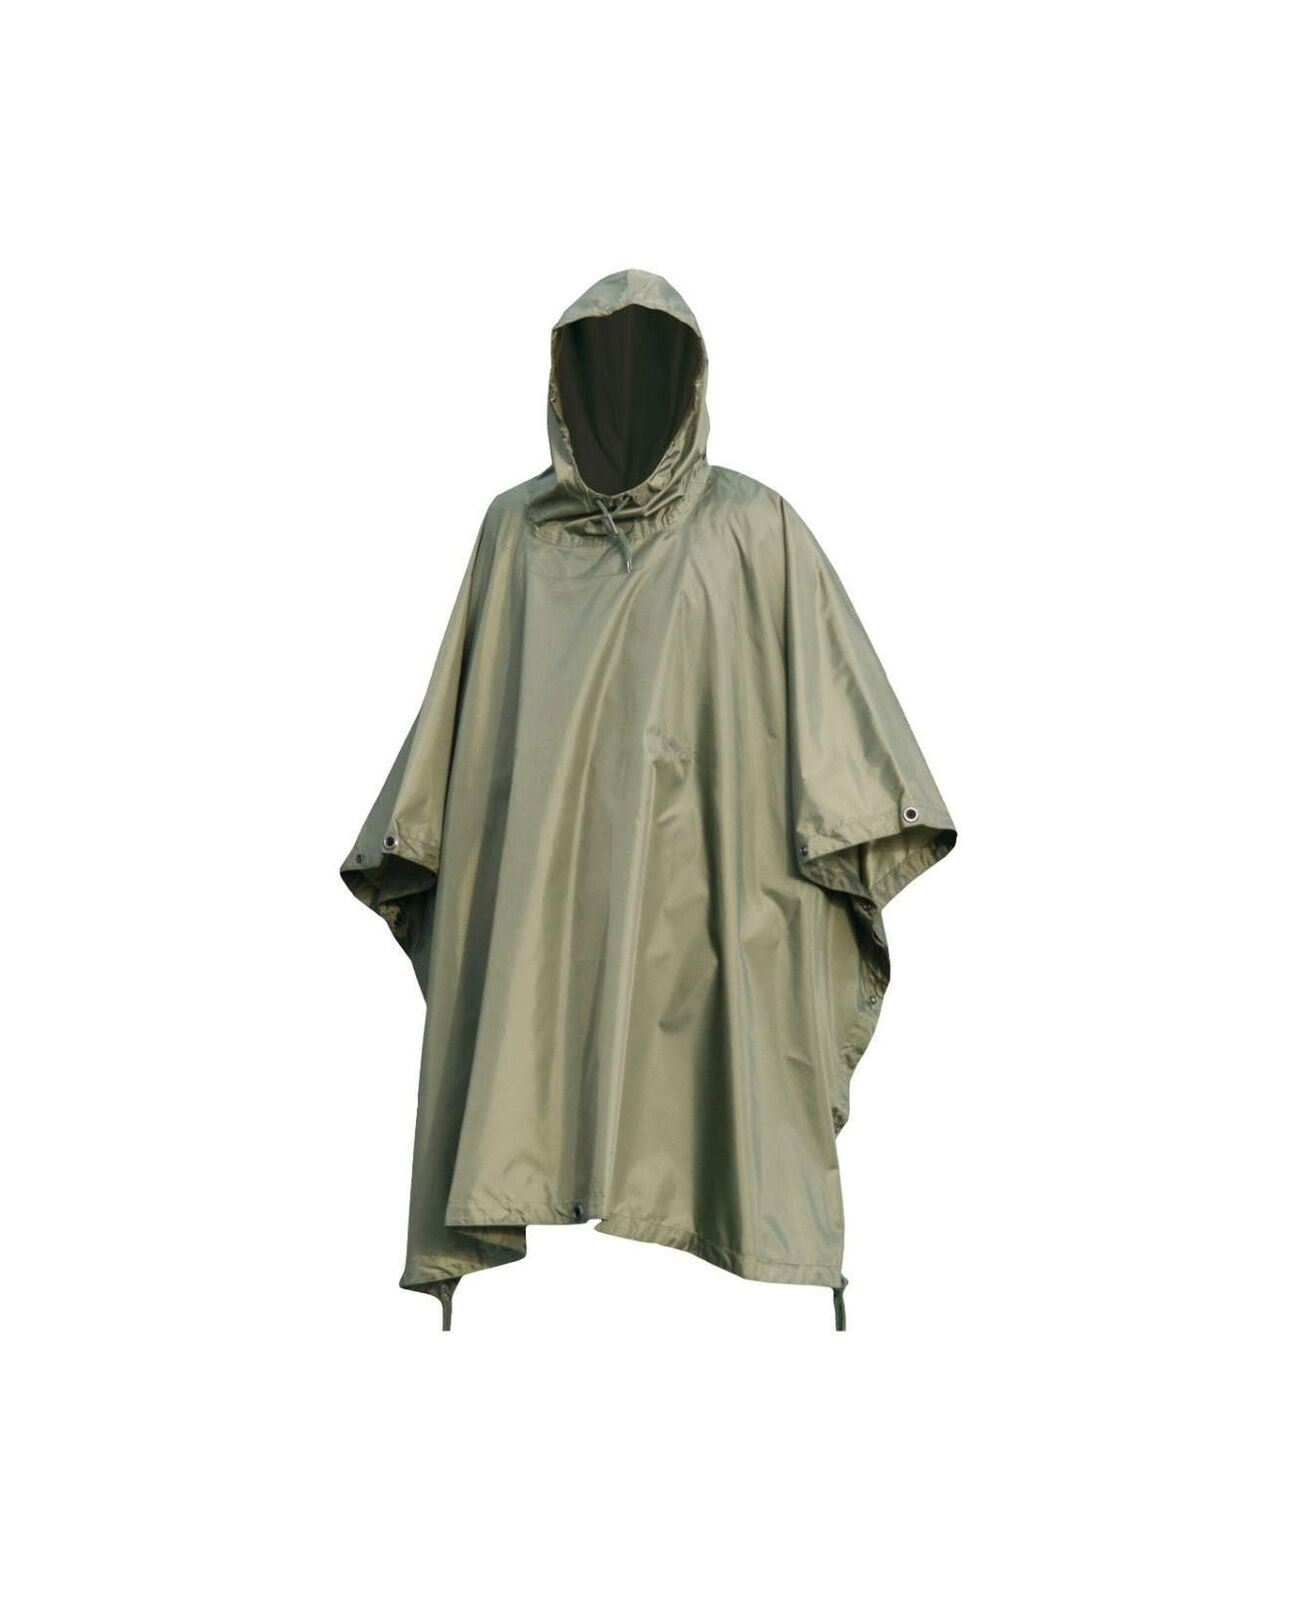 Mil-Tec Ripstop Wet Weather Poncho, Multi-Use Bivouac Sack, Emergency Shelter...